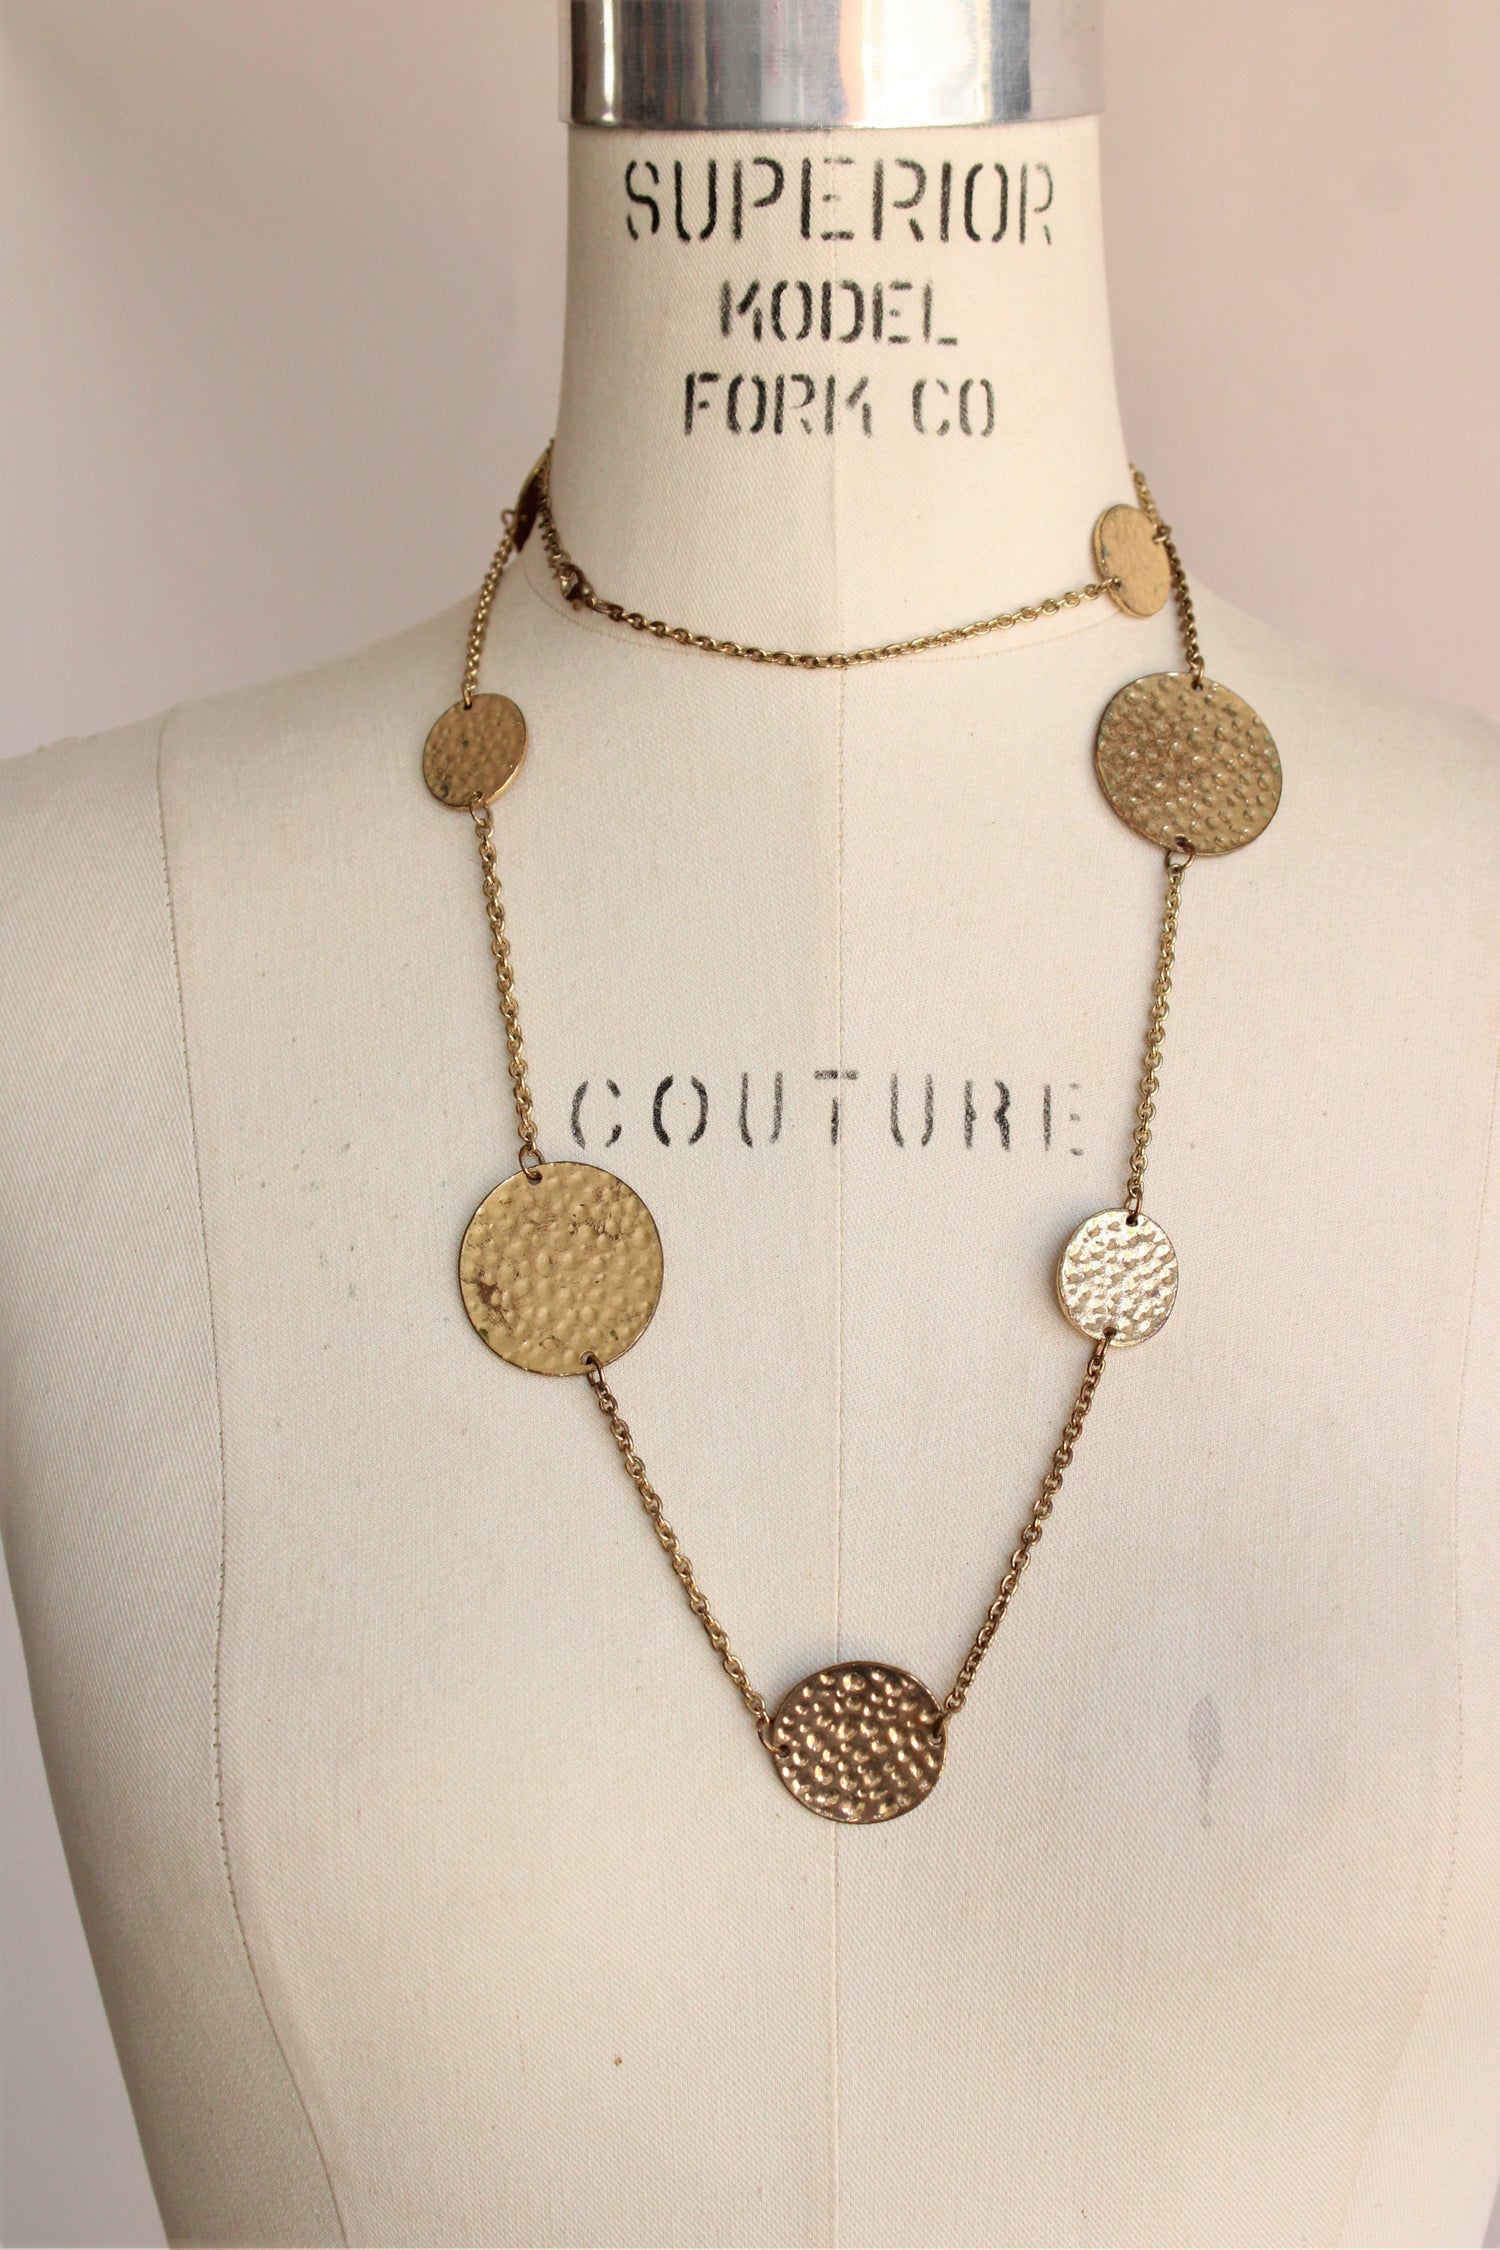 Vintage 1960s 1970s Gold Coin Necklace